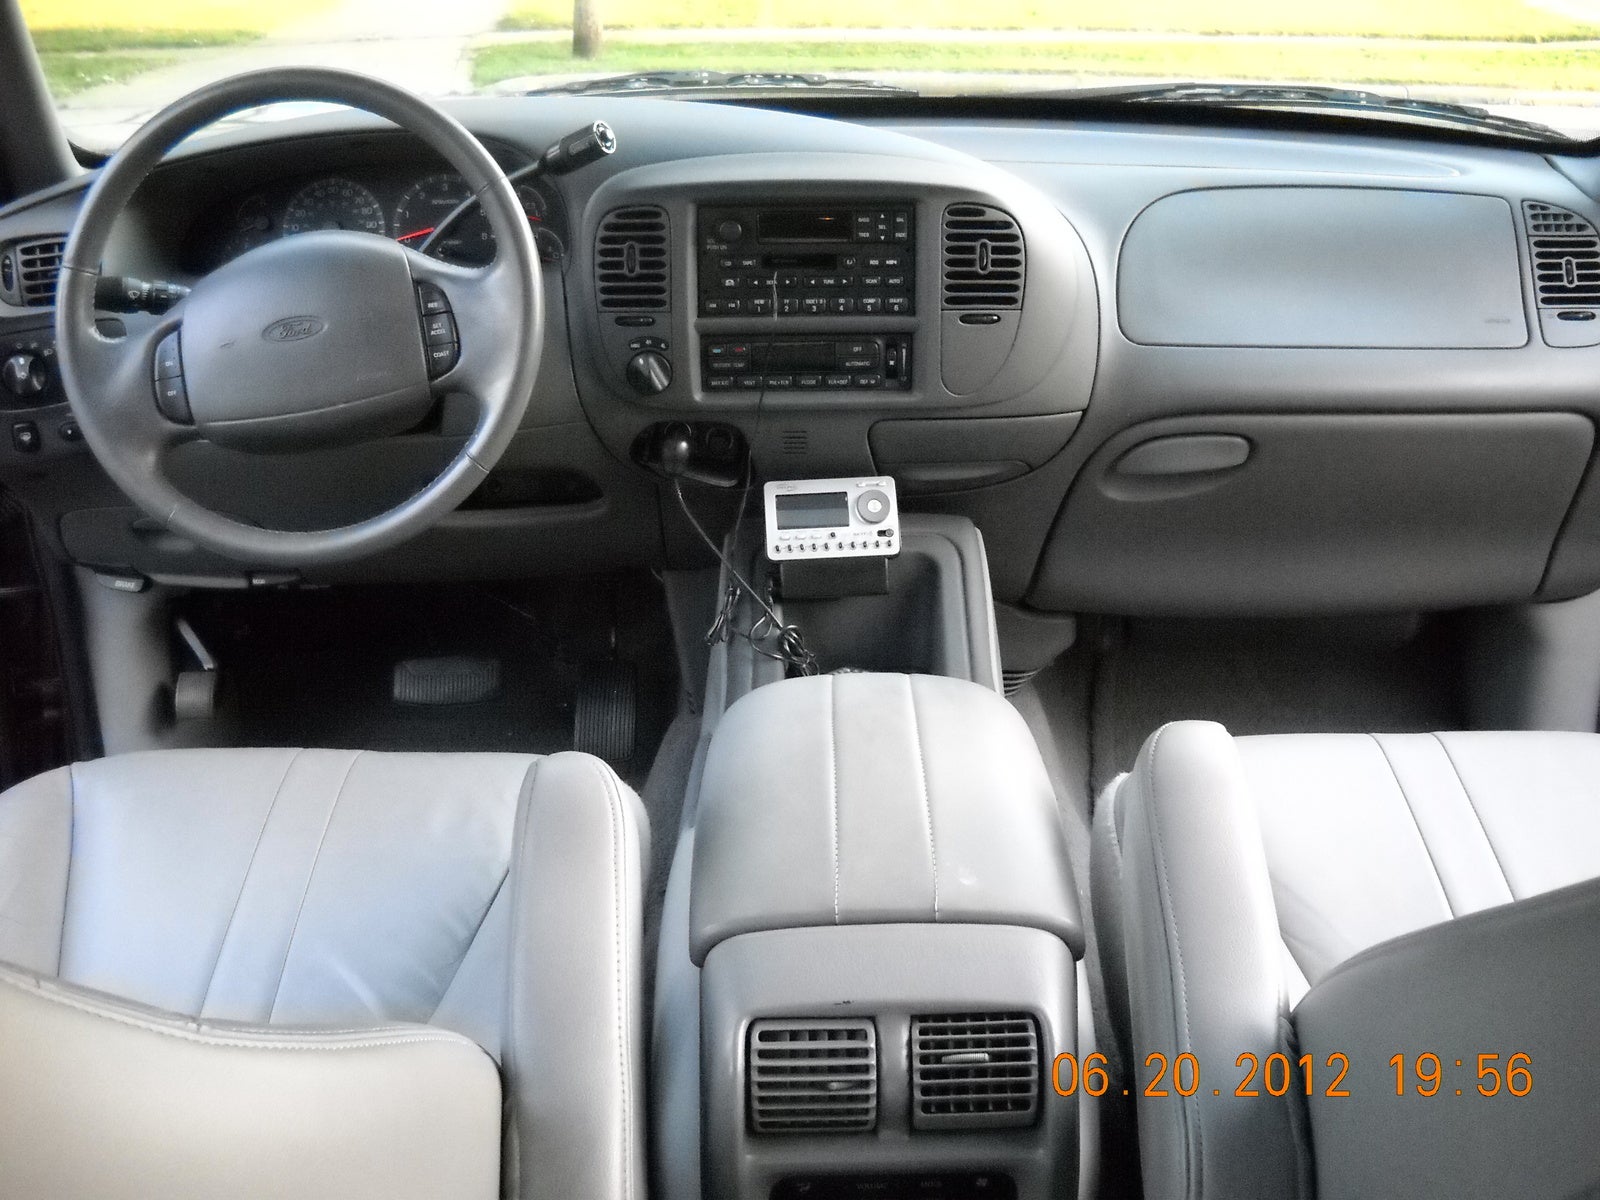 1999 Ford expedition interior pictures #10